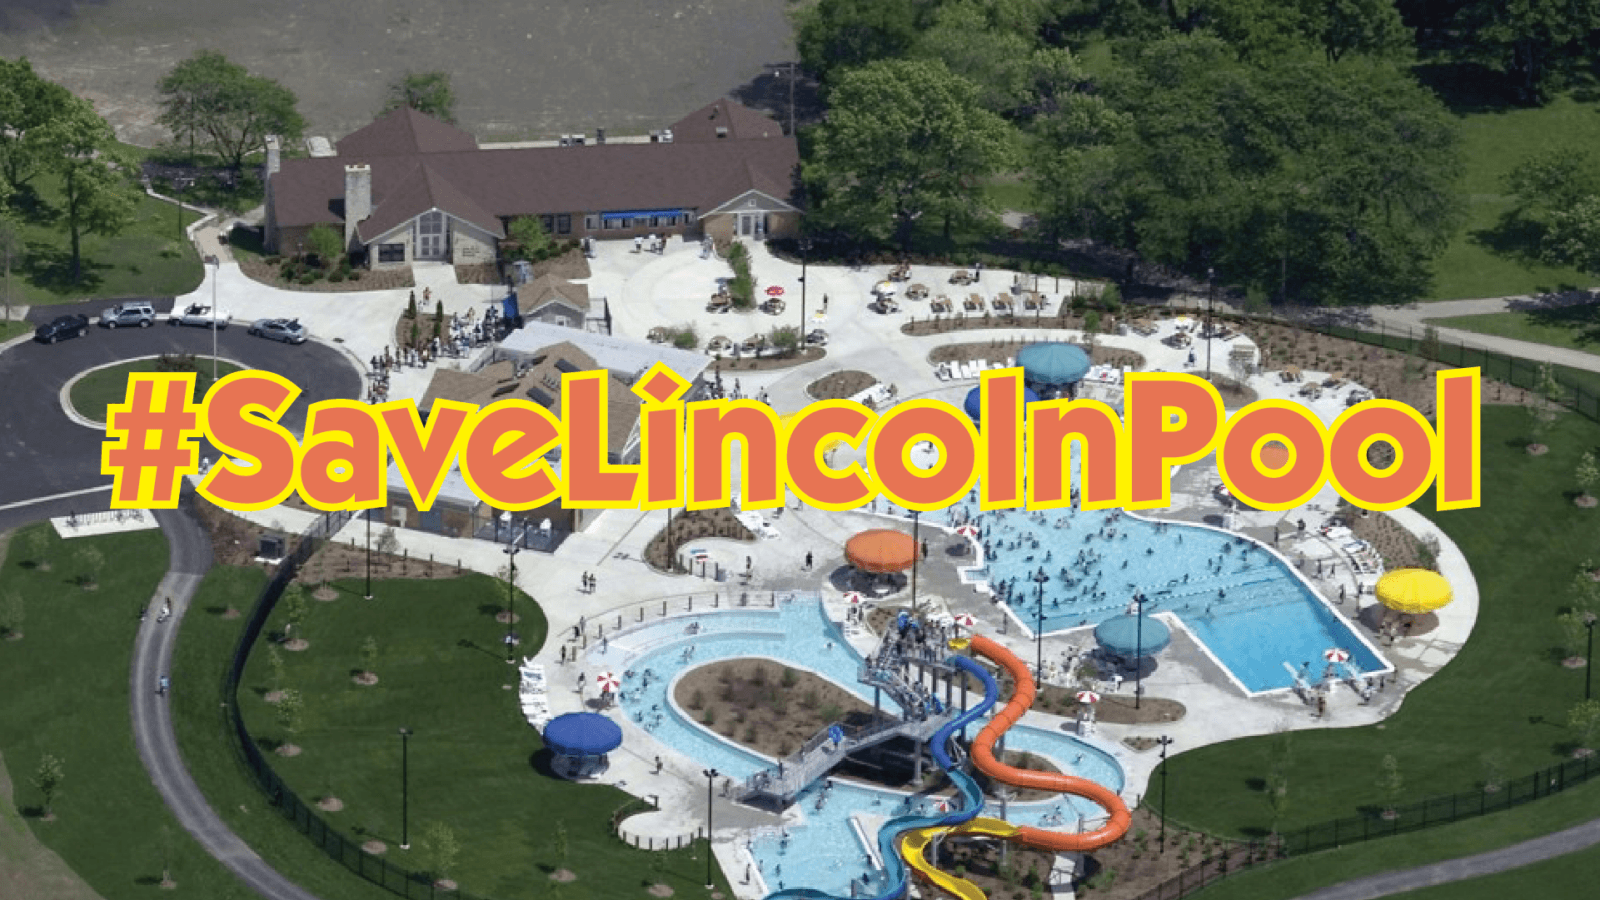 Help Save the Lincoln Park Pool!